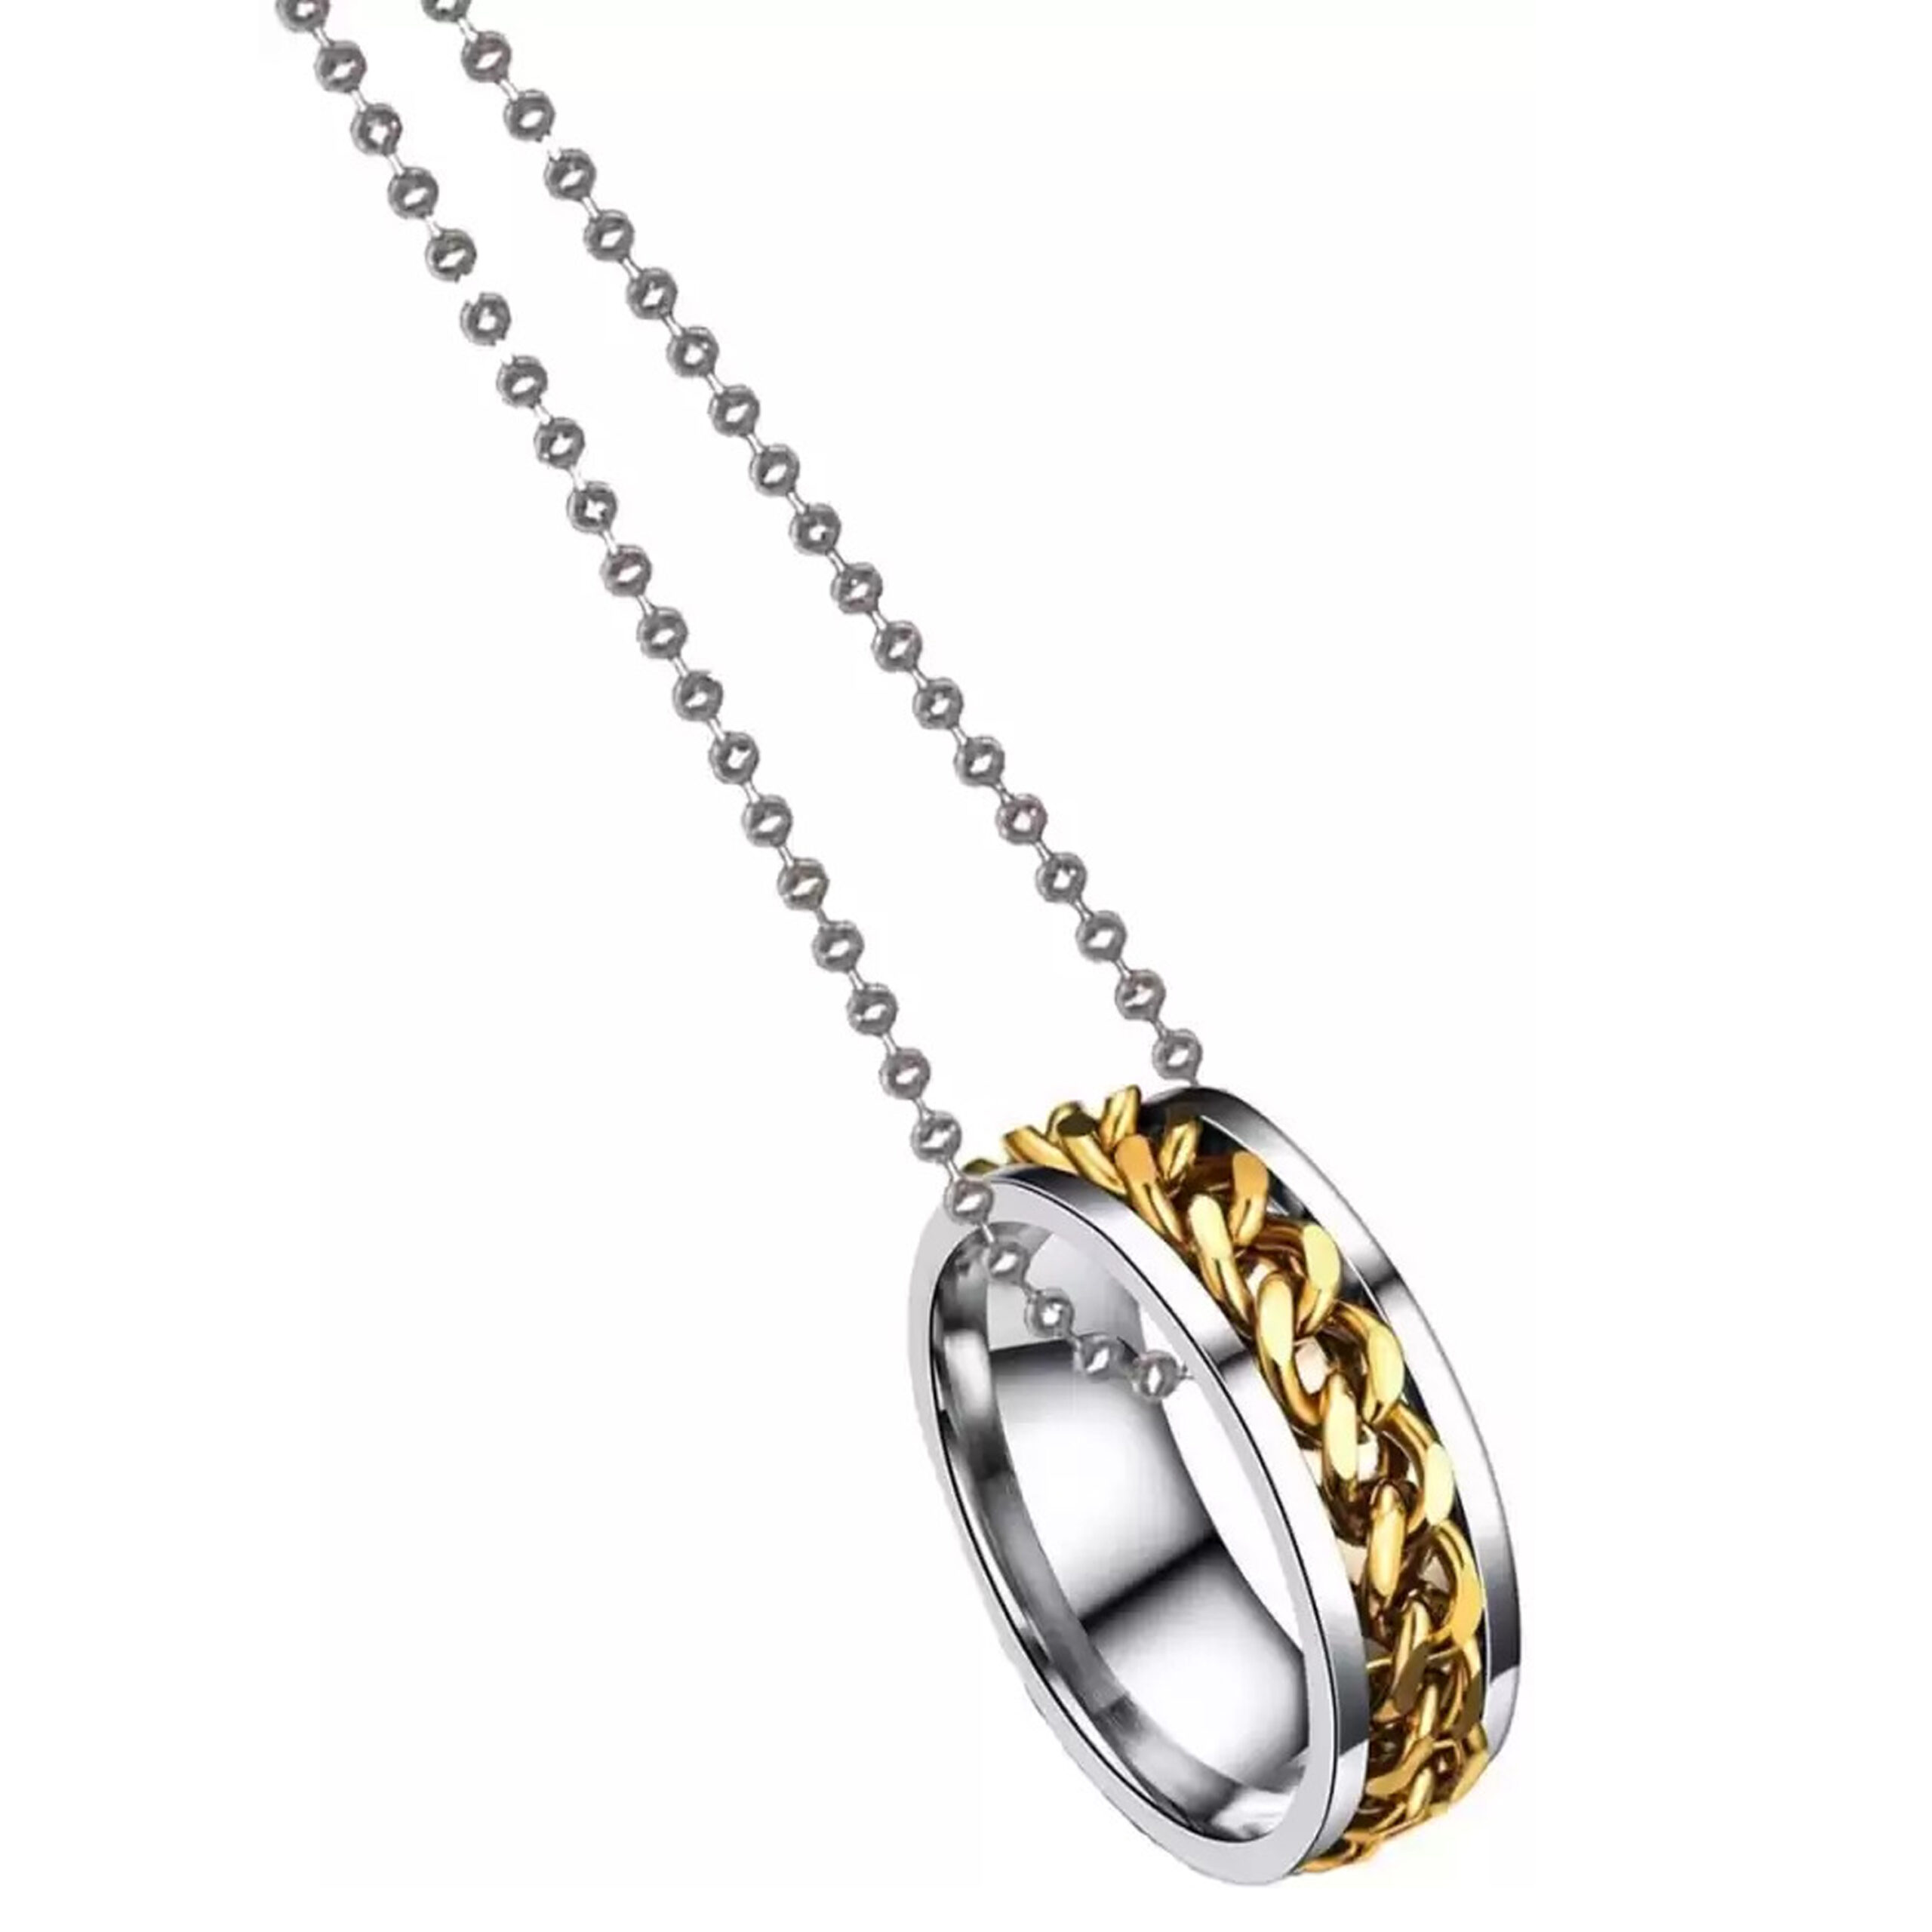 Buy Aatmana Men Silver-Plated Ring Pendant with Chain Online At Best Price  @ Tata CLiQ